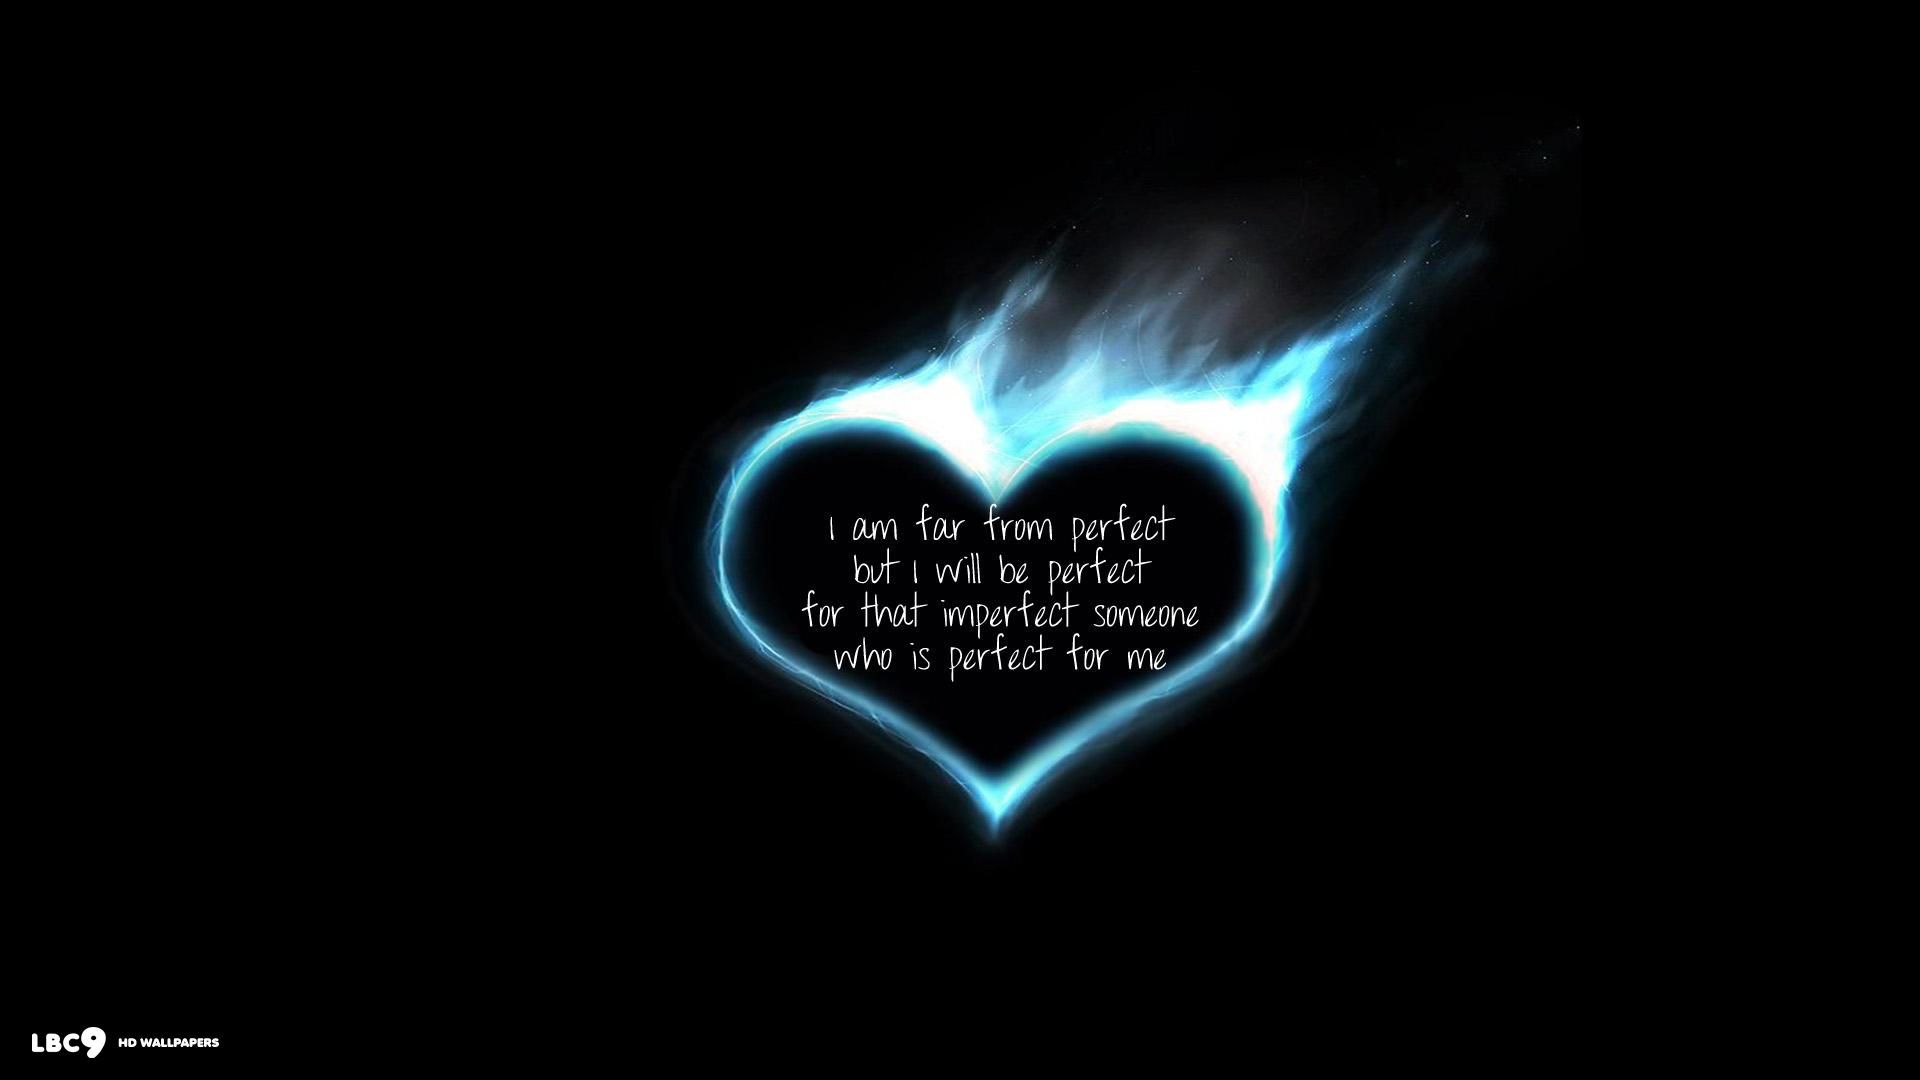 love quote backgrounds for computer